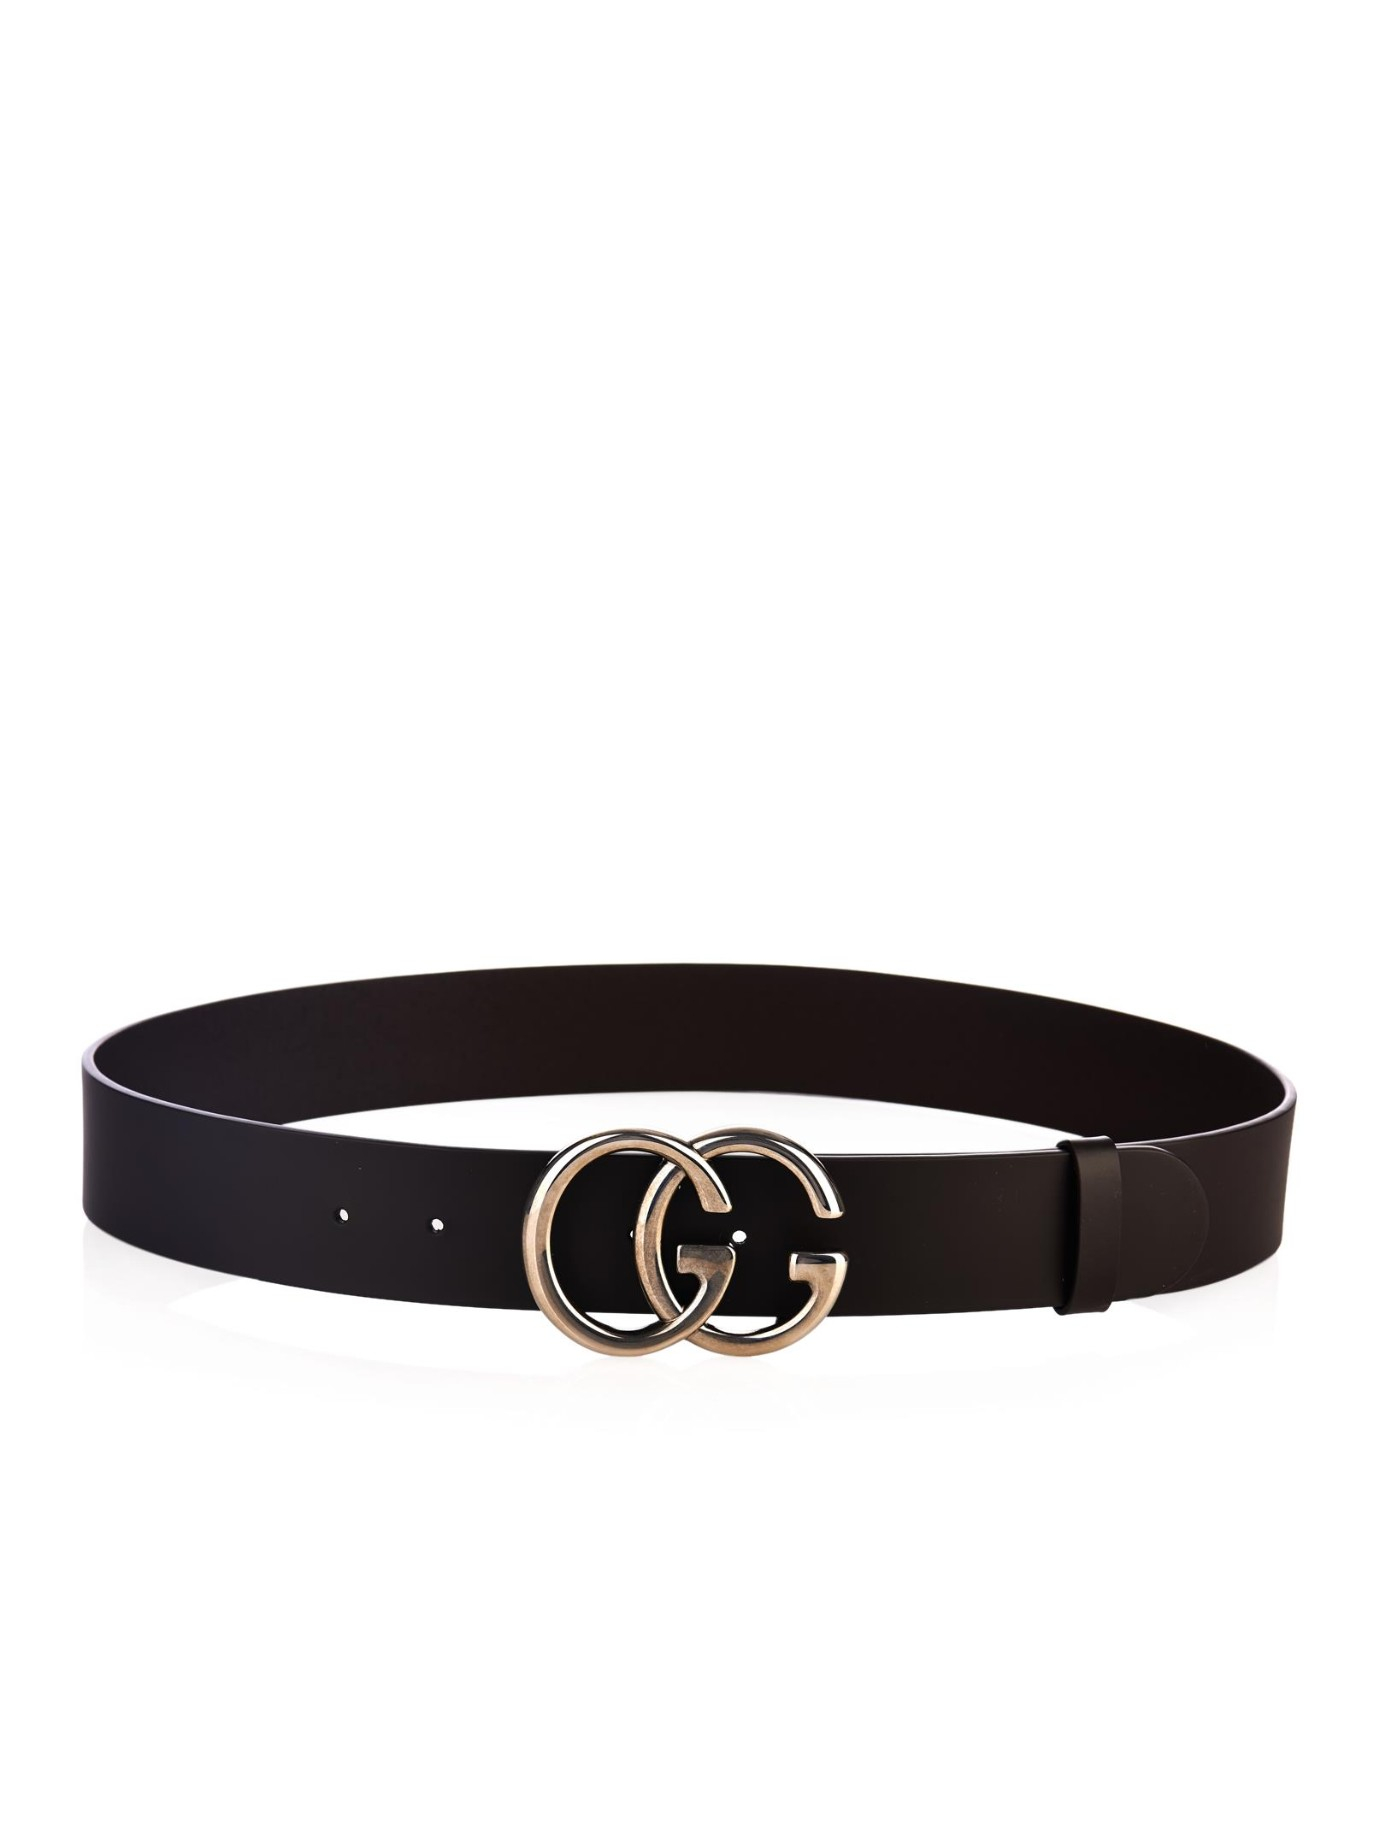 Lyst - Gucci Gg-Buckle Leather Belt in Brown for Men